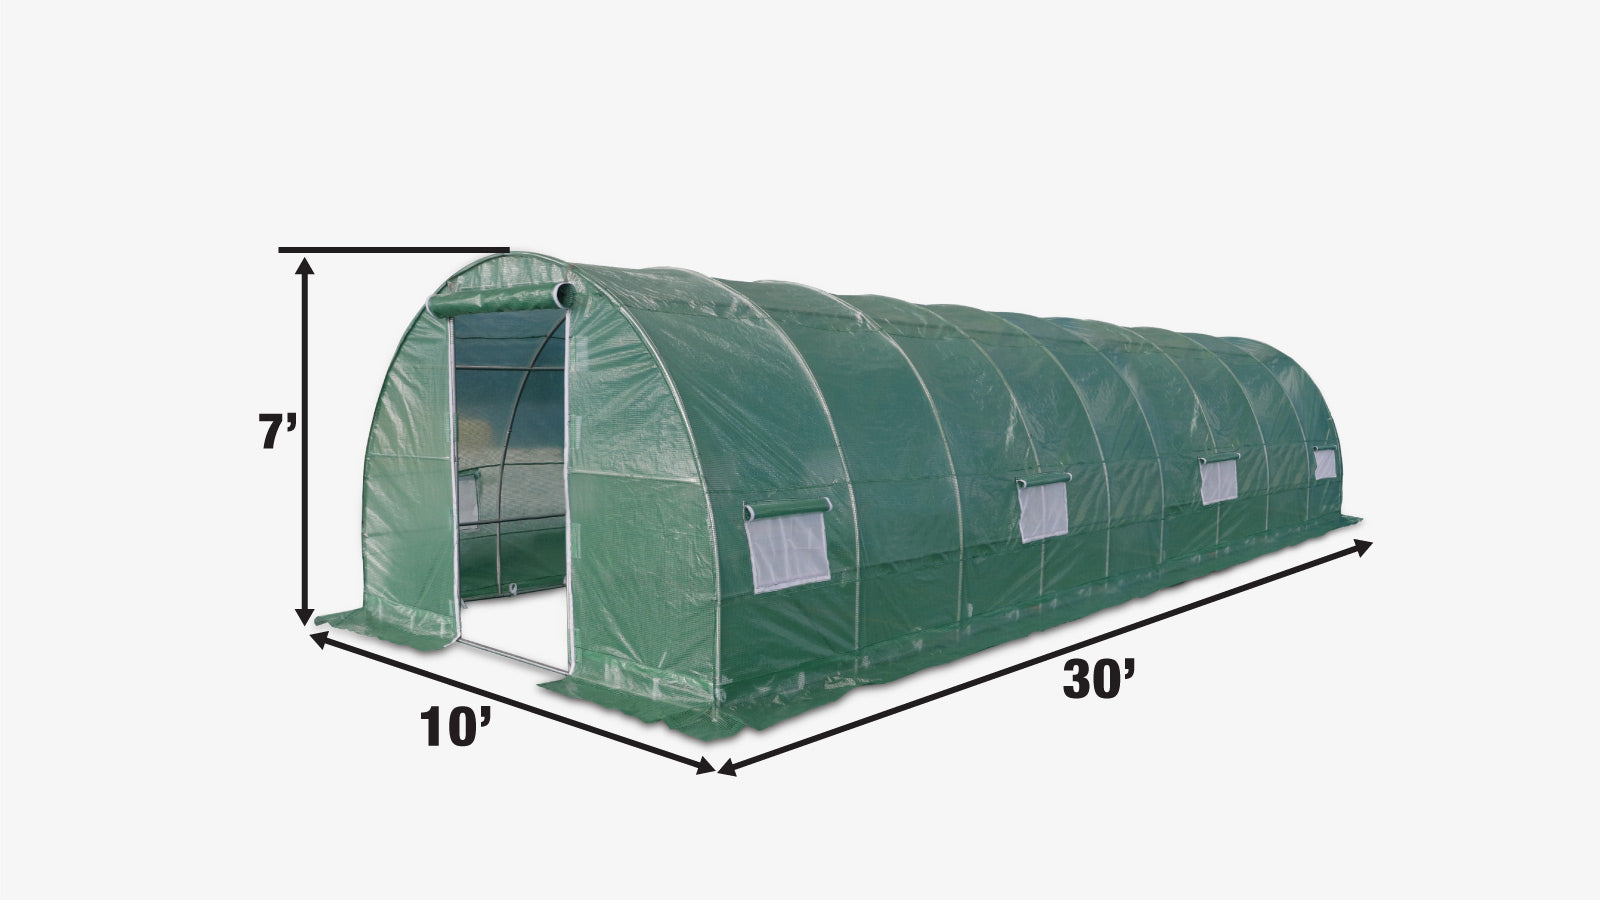 TMG Industrial 10' x 30' Tunnel Greenhouse Grow Tent with Ripstop Leno Cover, Cold Frame, Roll-Up Mesh Windows, Round Top Roof, TMG-GH1030R-specifications-image